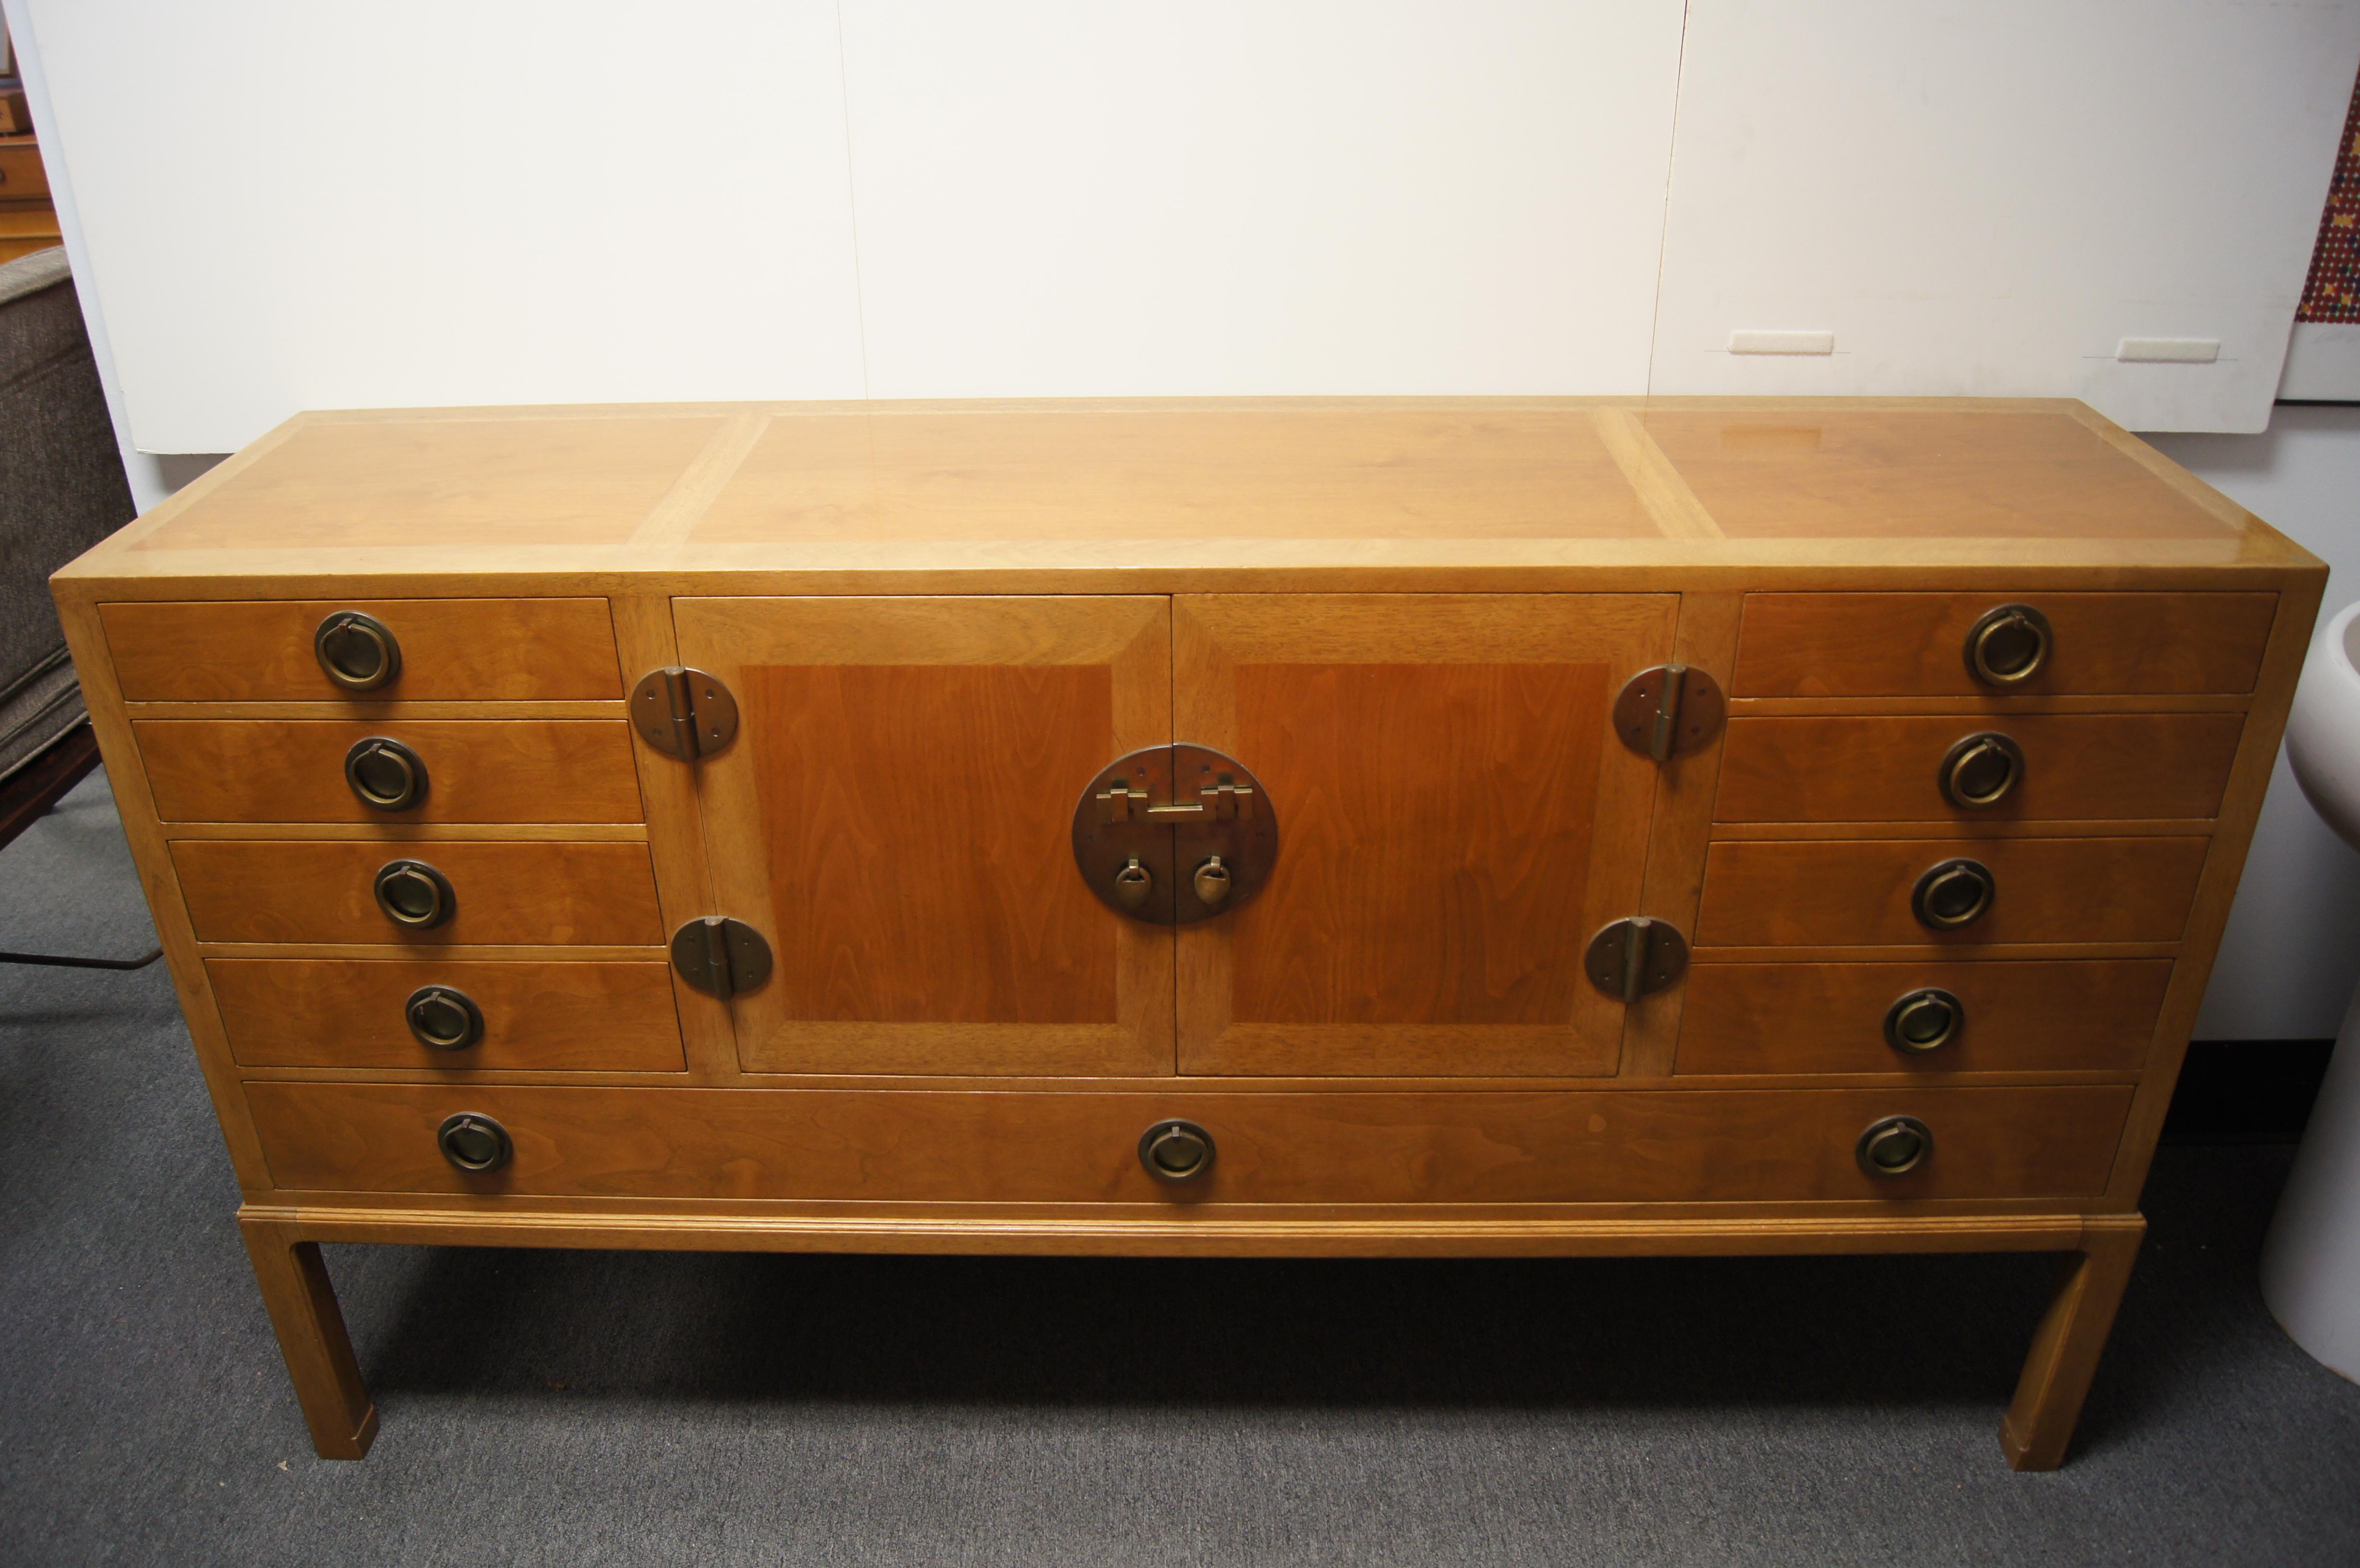 Designed by Edward Wormley for Dunbar in 1945, this exquisite sideboard, model 4579, appeared in the 1997 exhibition 